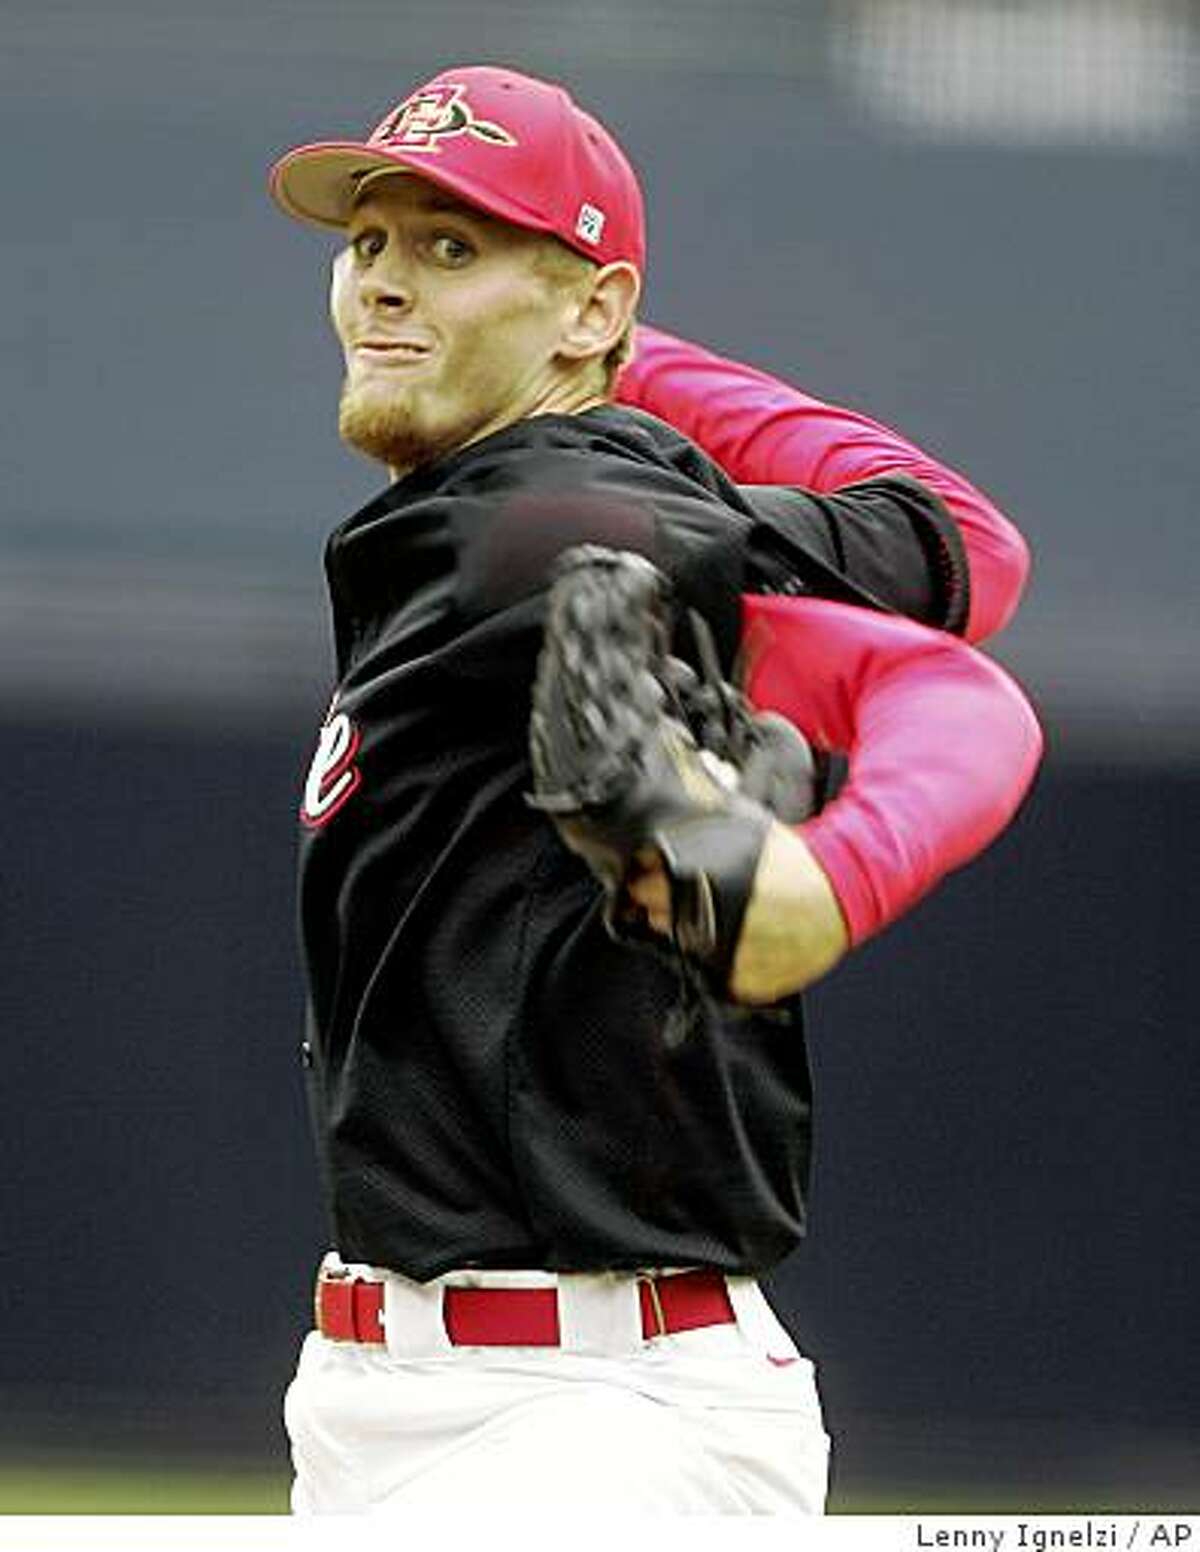 In this photo taken on Friday, April 3, 2009, Stephen Strasburg, of San Diego State University, pitches during a game in San Diego. Considered one of the best prospects in draft history, Strasburg is expected to go No. 1 to the Washington Nationals on Tuesday night June 9, 2009. (AP Photo/Lenny Ignelzi)